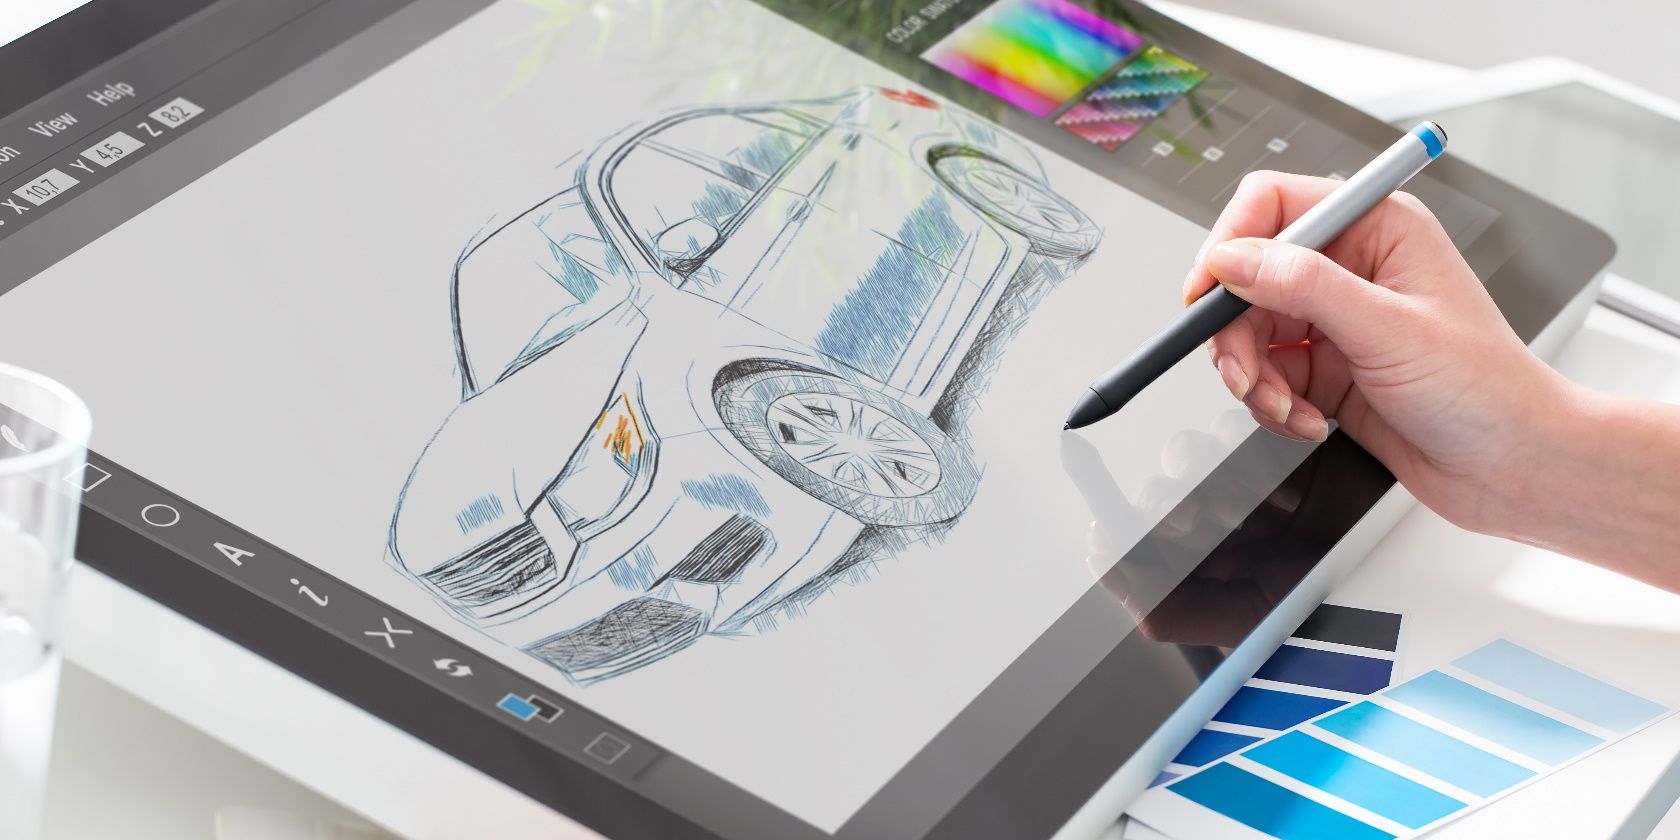 The 11 Best Drawing Tablets for Digital Artists